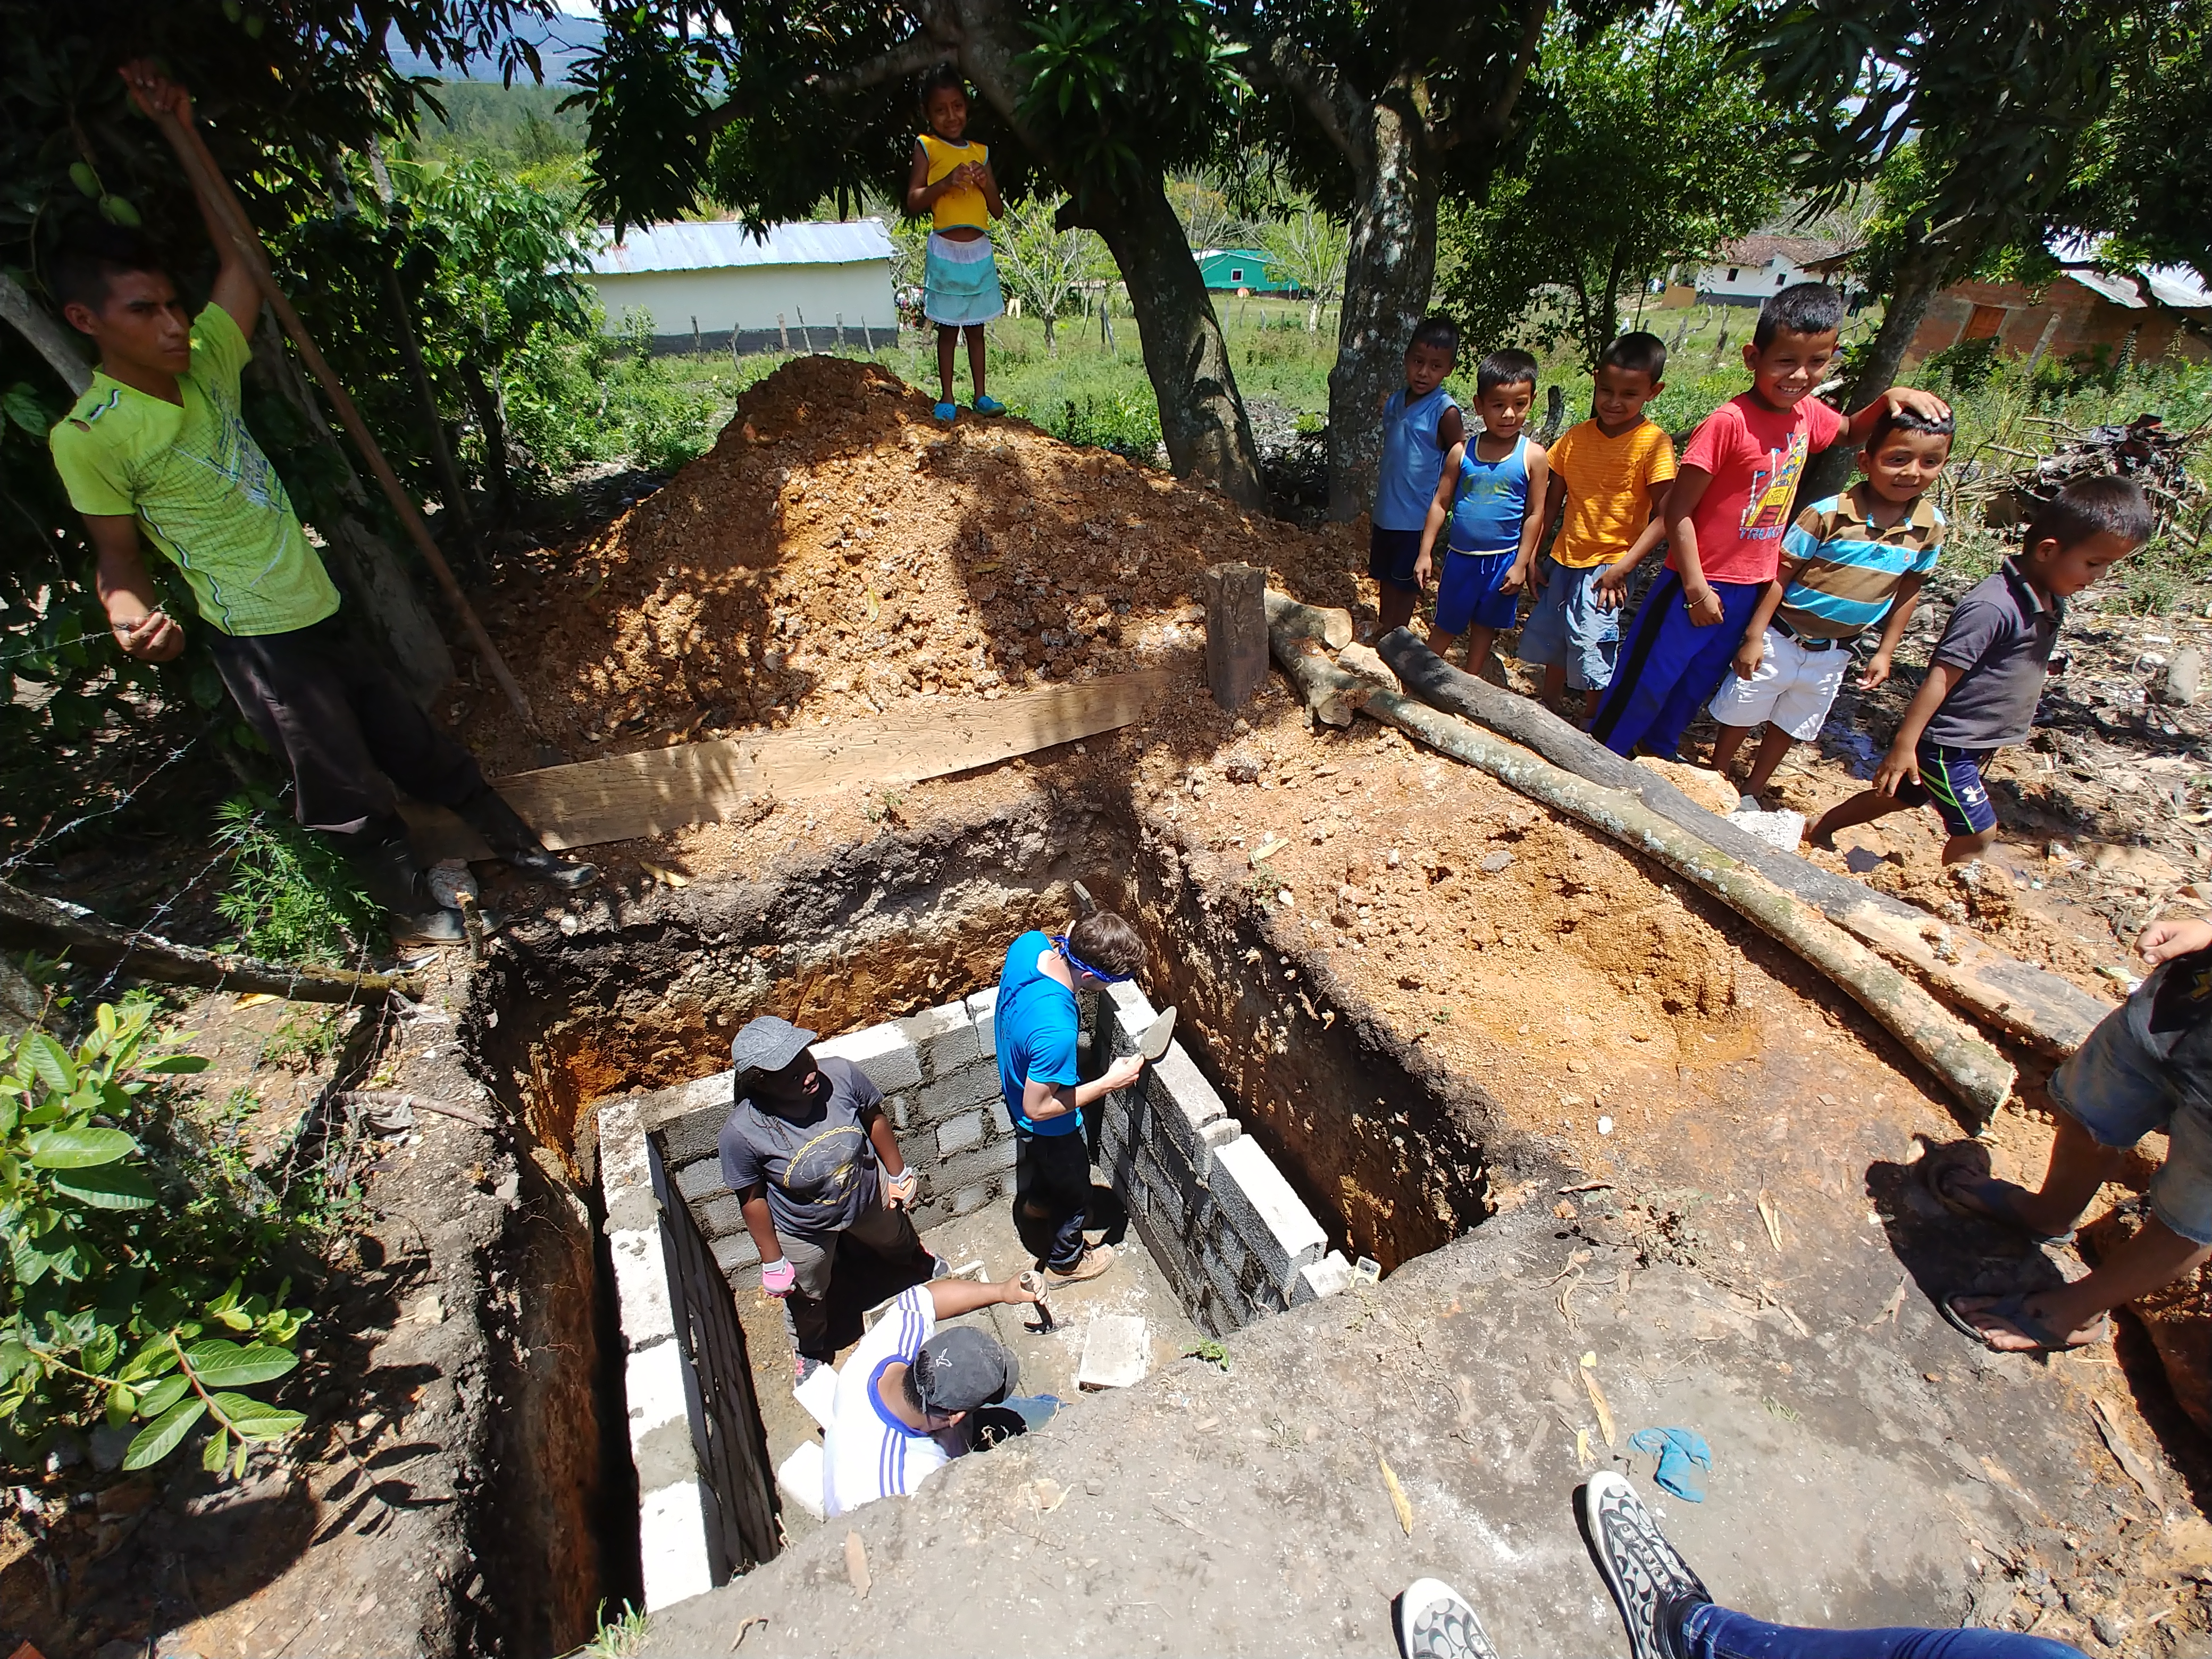 Children in the village of Linares, Honduras, watch ACU engineering and physics students construct latrines they designed as a class project.